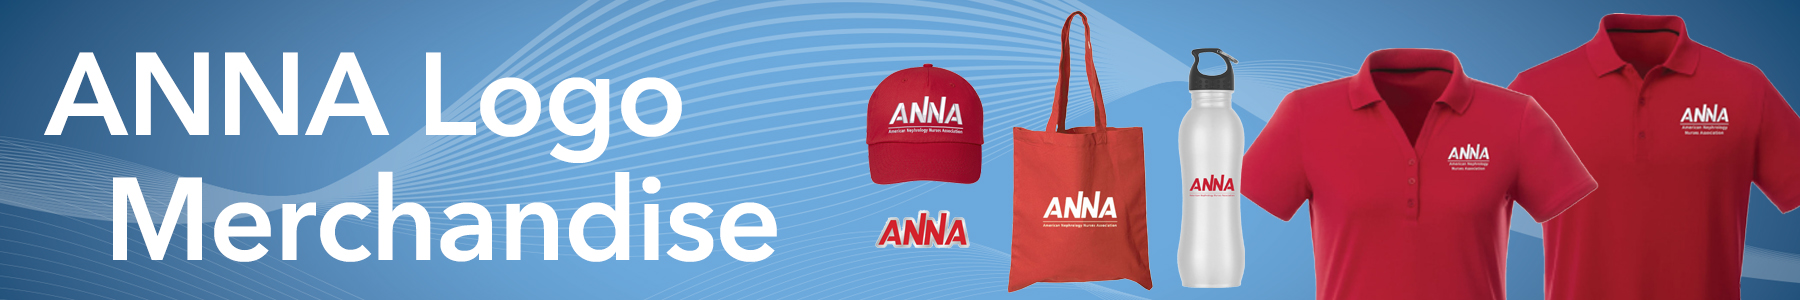 ANNA Logo Products